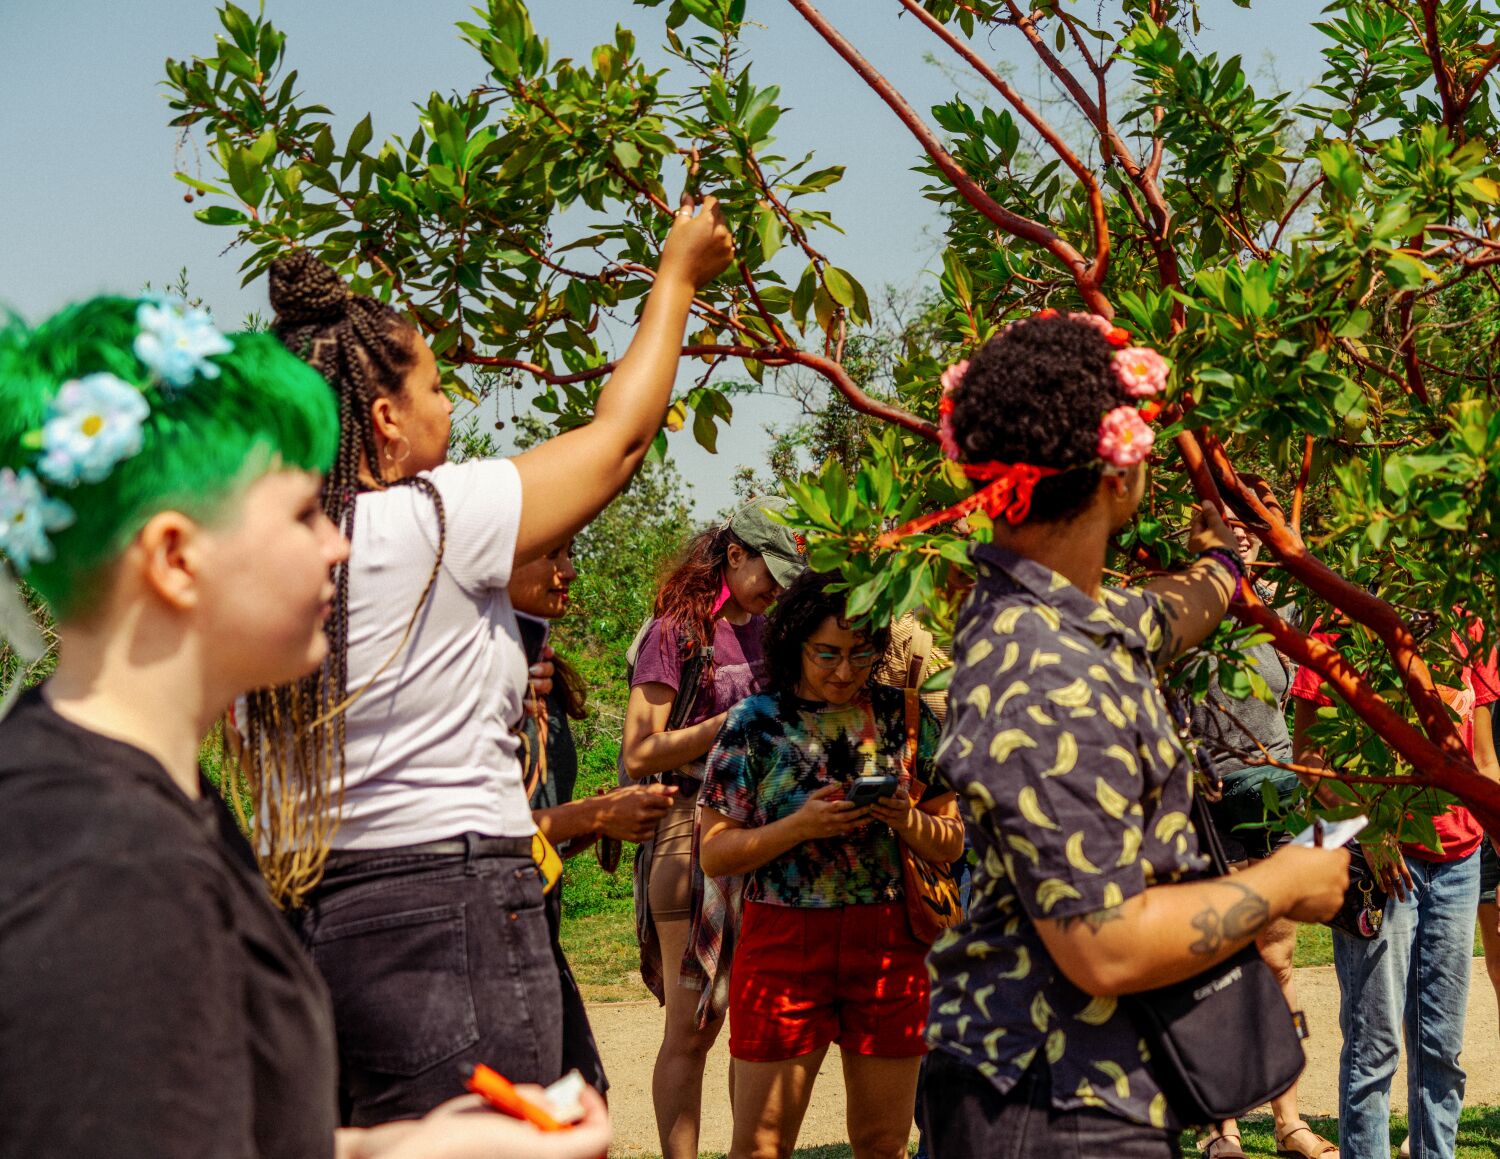 Taking up space in nature is liberating. 'We look like this,' say L.A.'s queer plant lovers